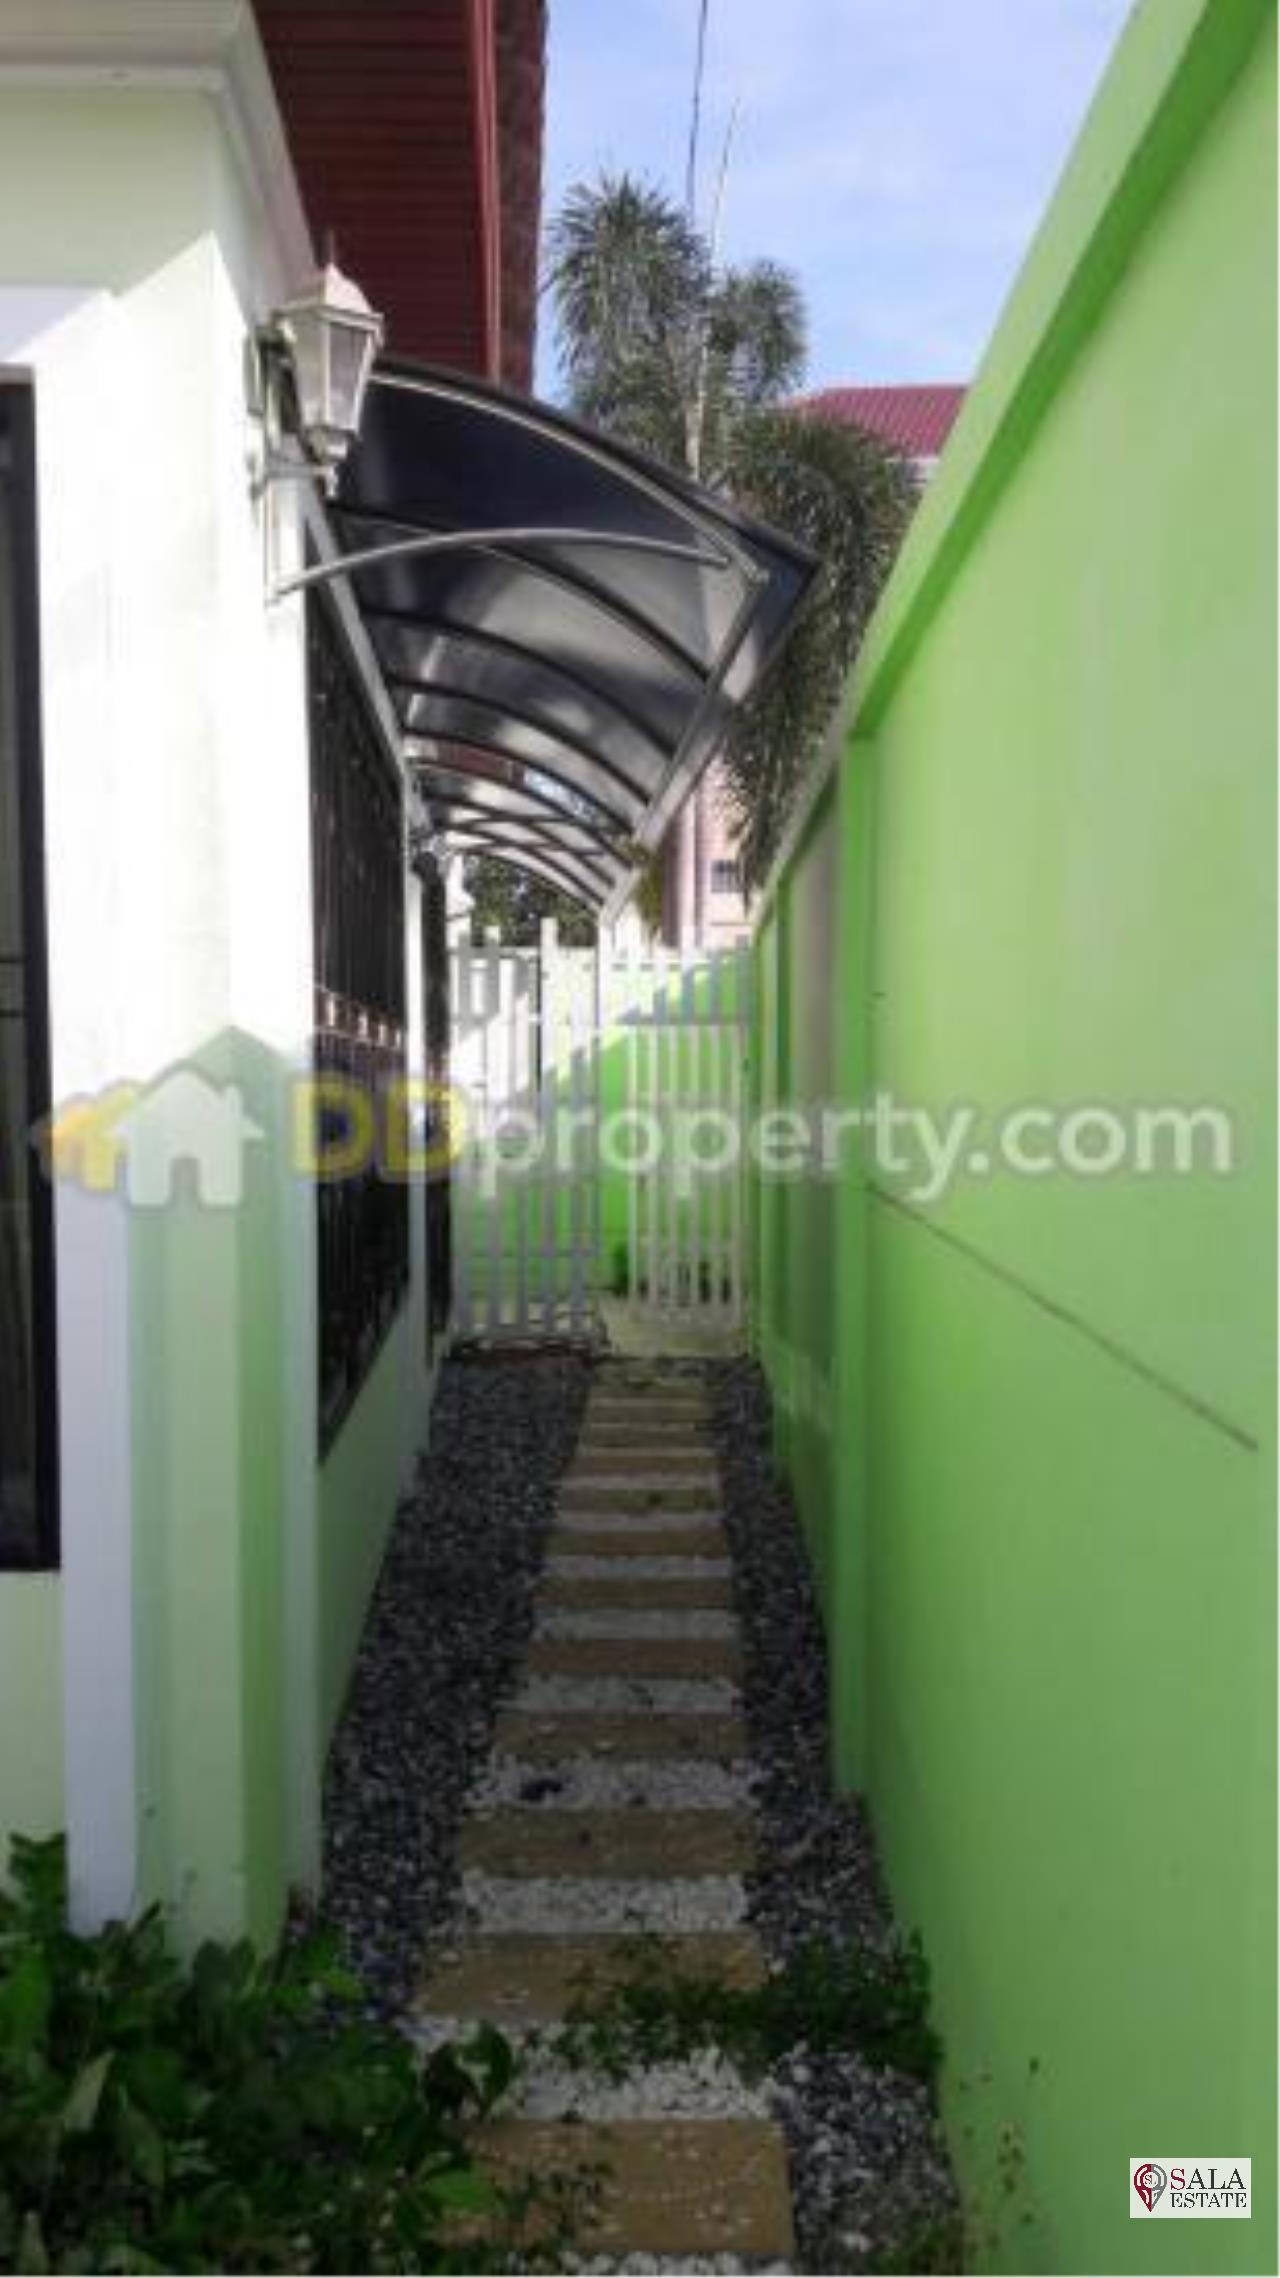 SALA ESTATE Agency's HOUSE FOR SALE - NEAR SUVARNABHUM AIRPORT AND BANG NA -TRAT RD. 3